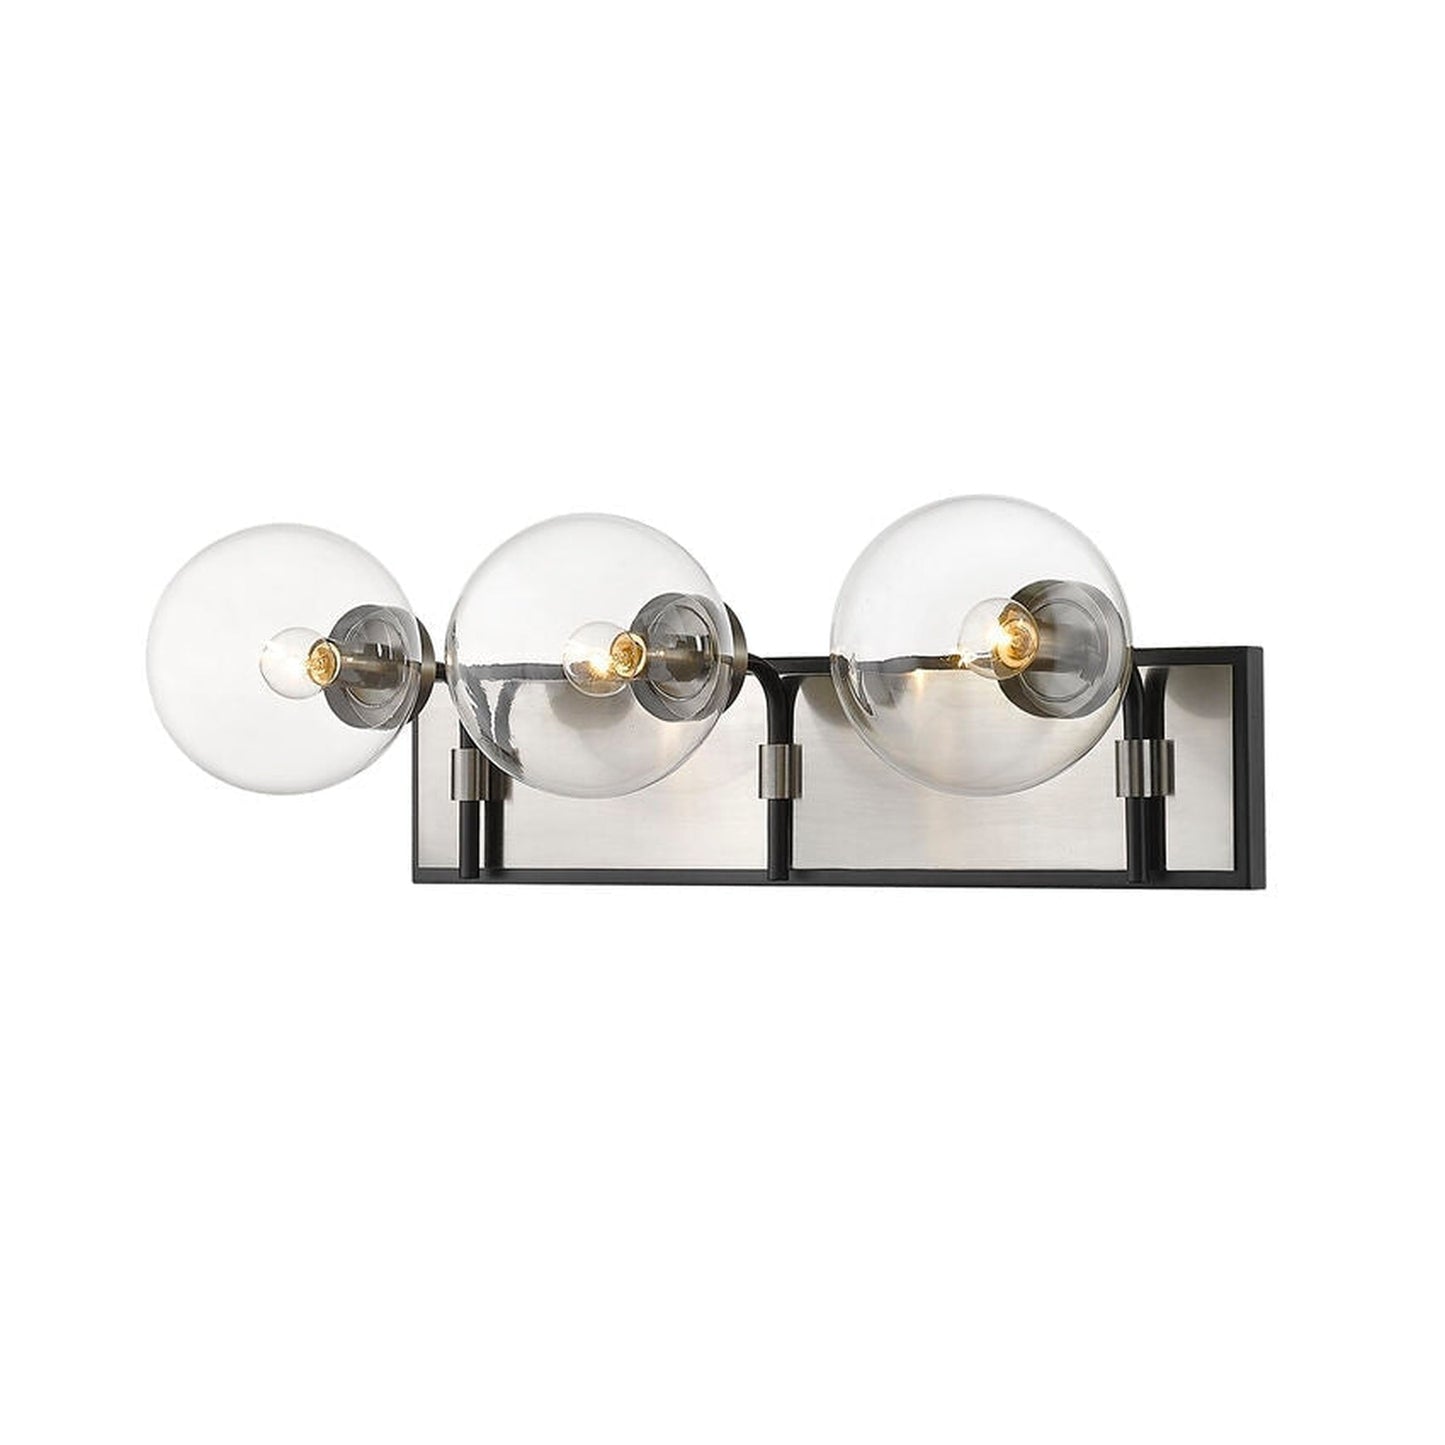 Z-Lite Parsons 24" 3-Light Matte Black and Brushed Nickel Vanity Light With Clear Glass Shade